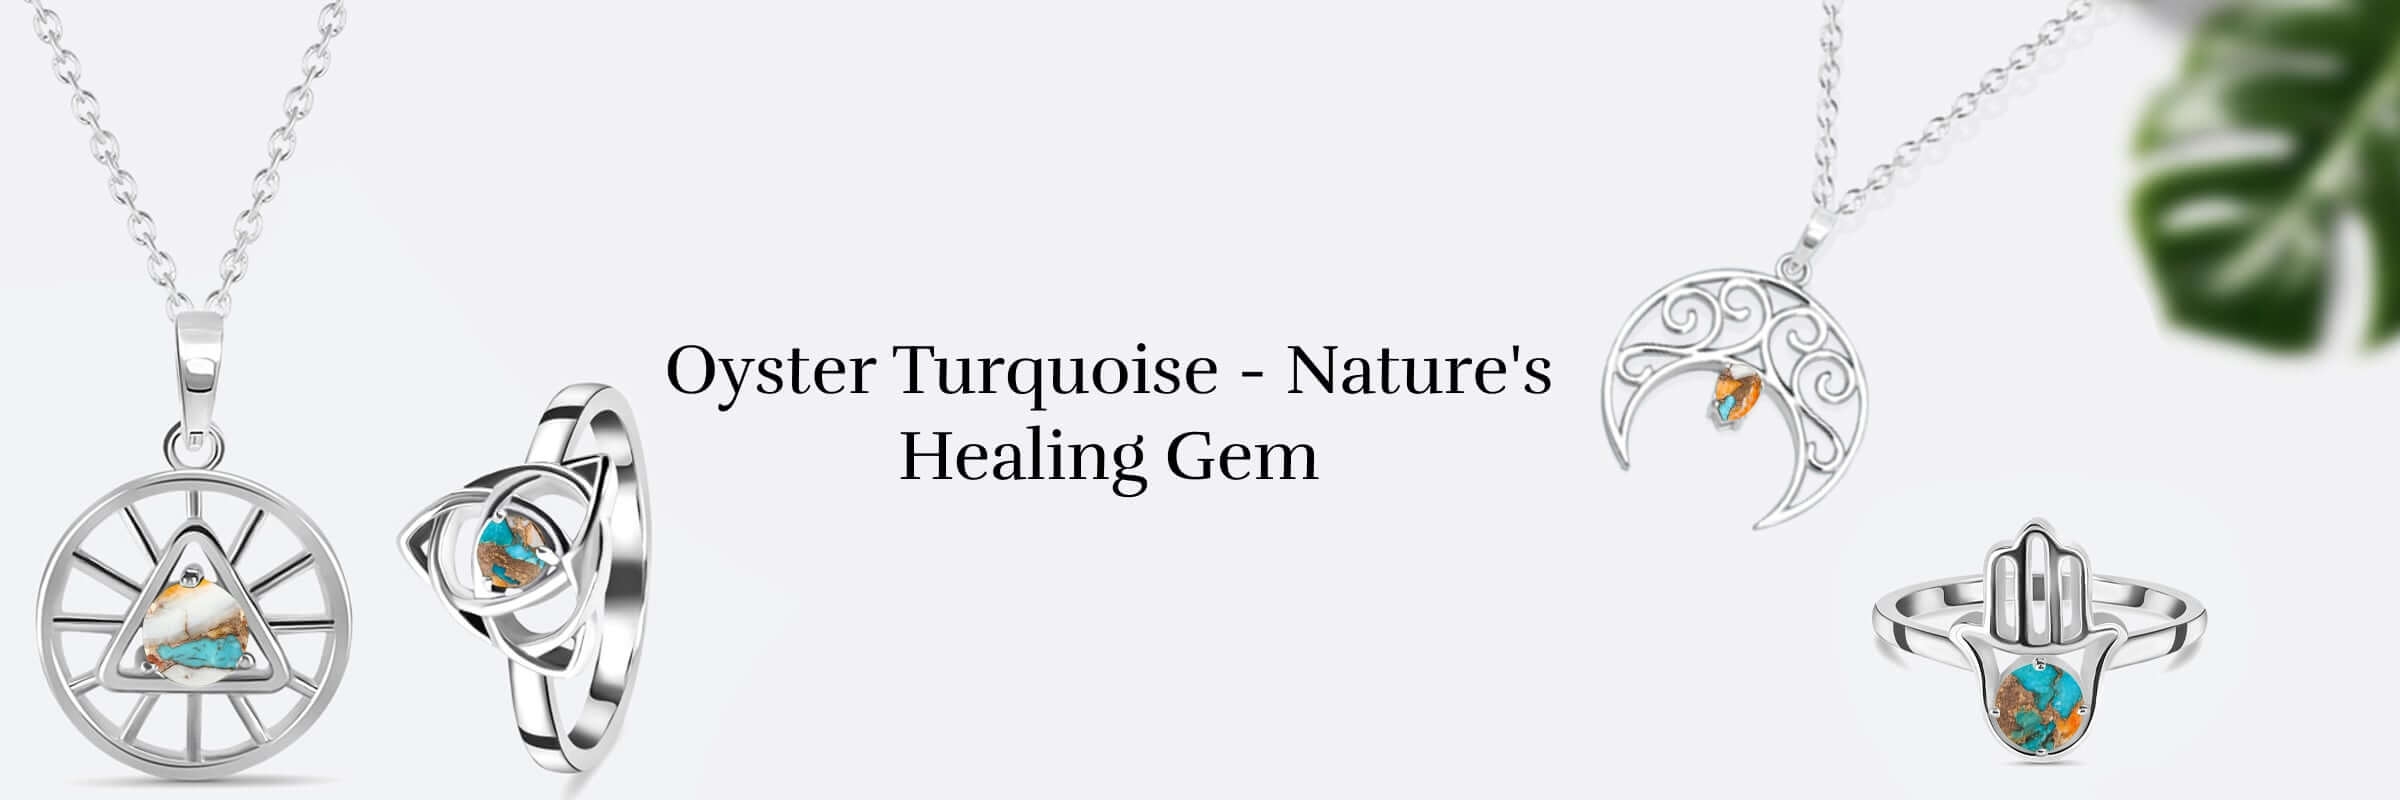 Oyster Turquoise Healing properties